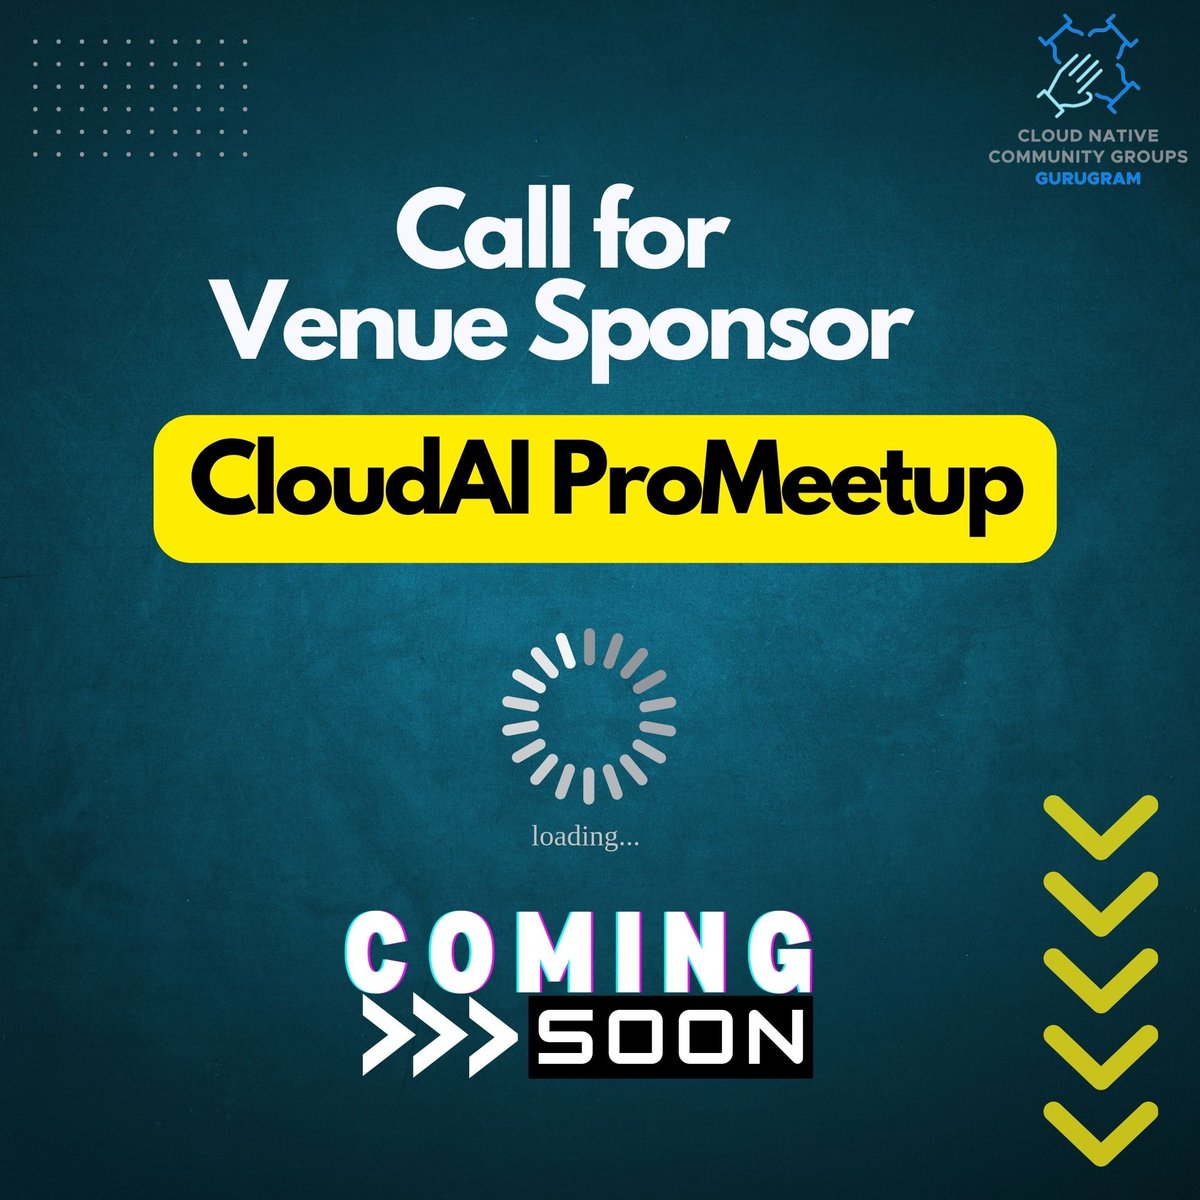 📢 Calling all venues and sponsors! 🌟 We're excited to invite potential venues and sponsors to partner with us for the upcoming CloudAI ProMeetup, hosted by the Cloud Native Community Group Gurugram. #VenueCall #SponsorshipOpportunity #CloudAI #ProMeetup #CloudNative #CNCF